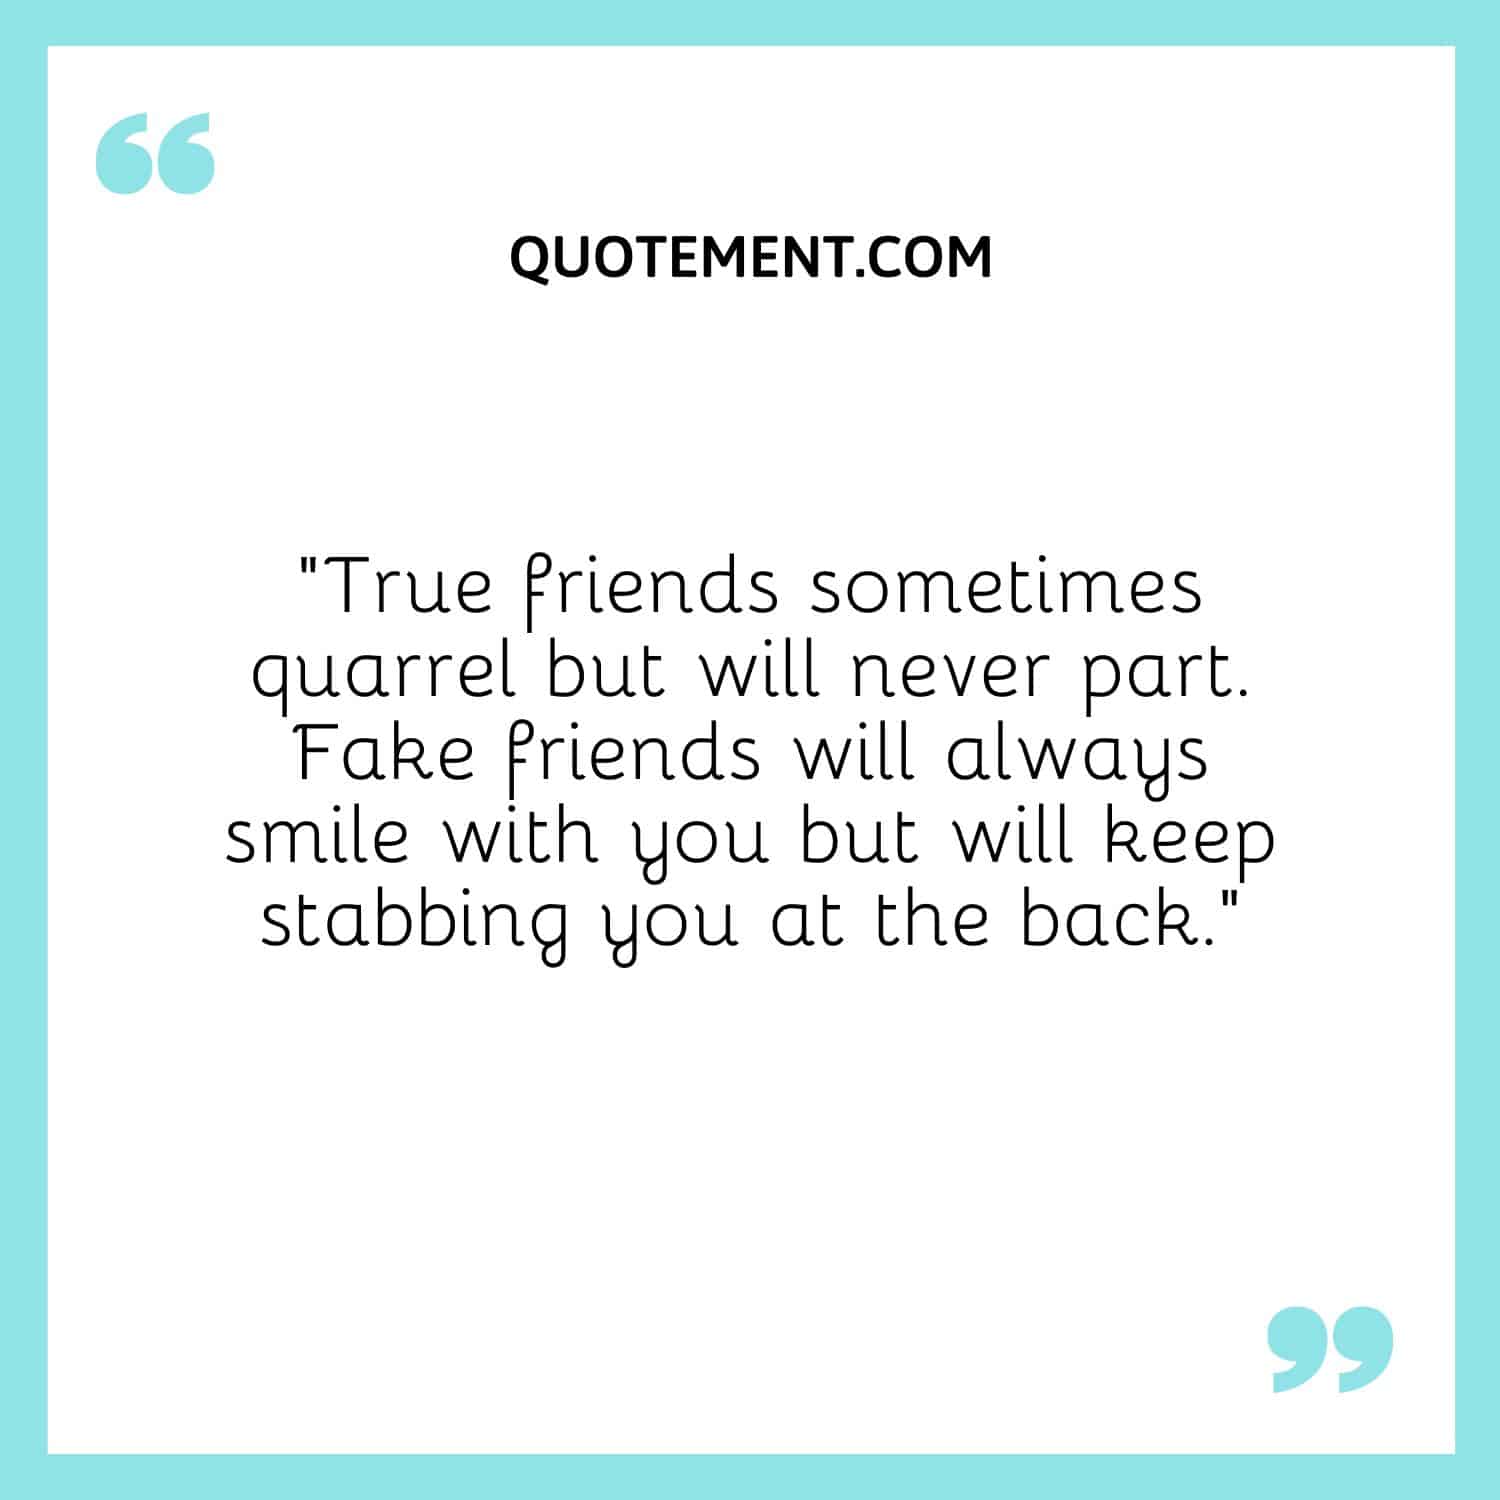 “True friends sometimes quarrel but will never part. Fake friends will always smile with you but will keep stabbing you at the back.”